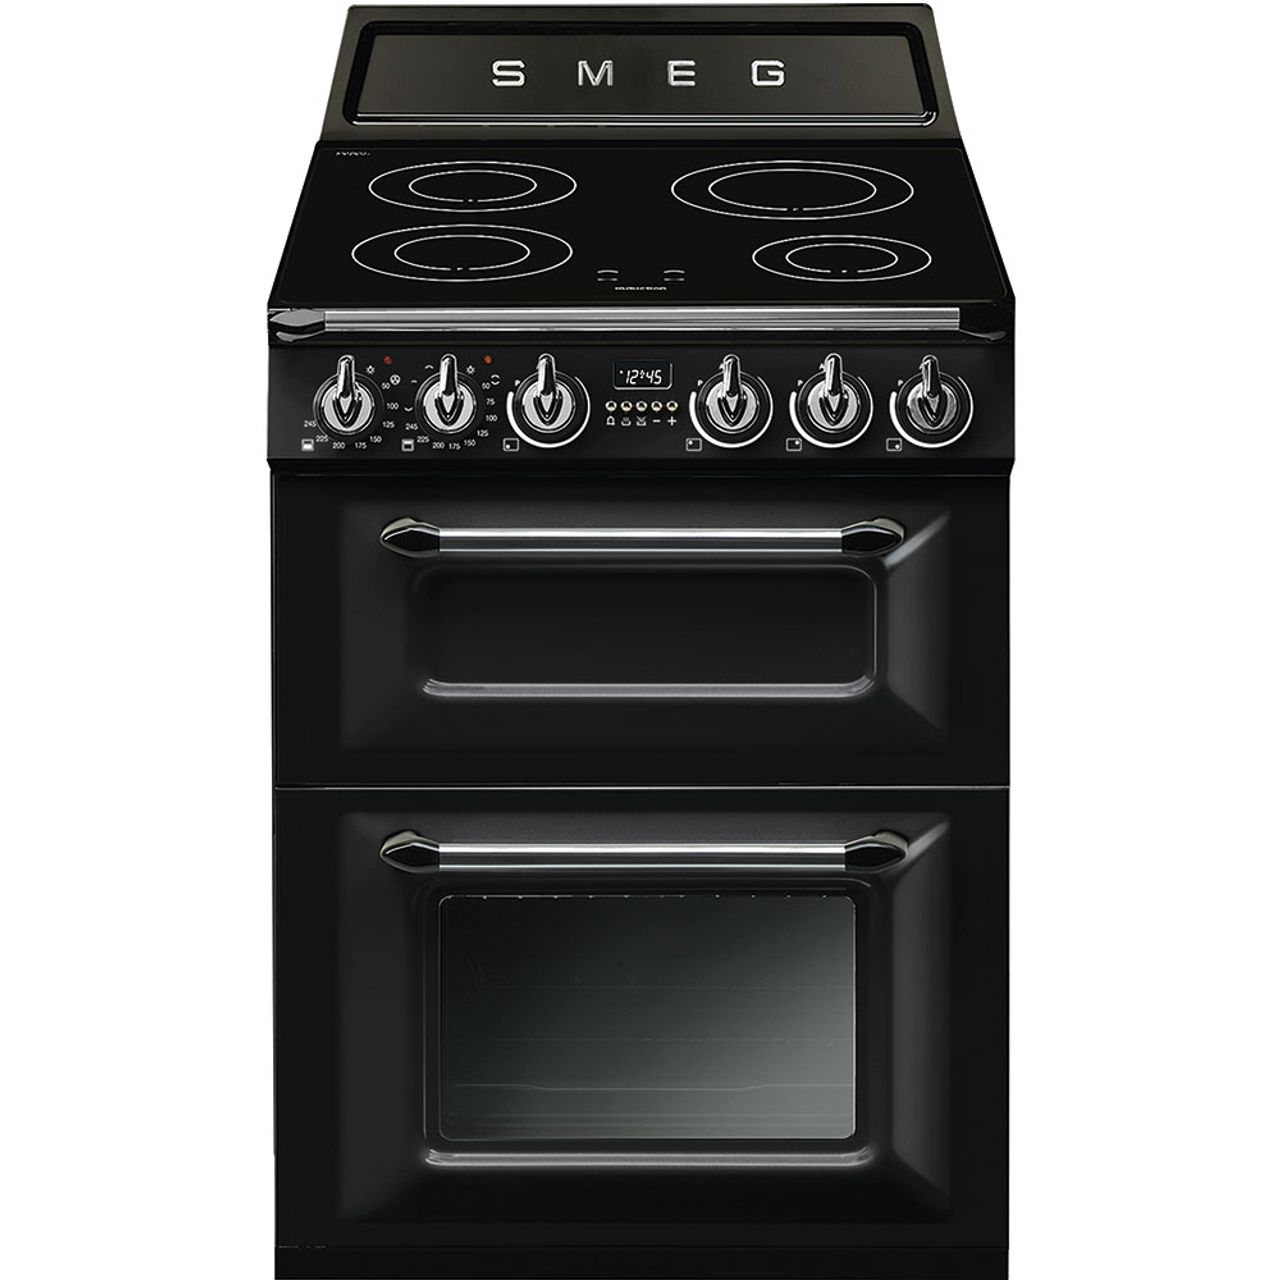 Smeg Victoria TR62IBL Electric Cooker with Induction Hob Review